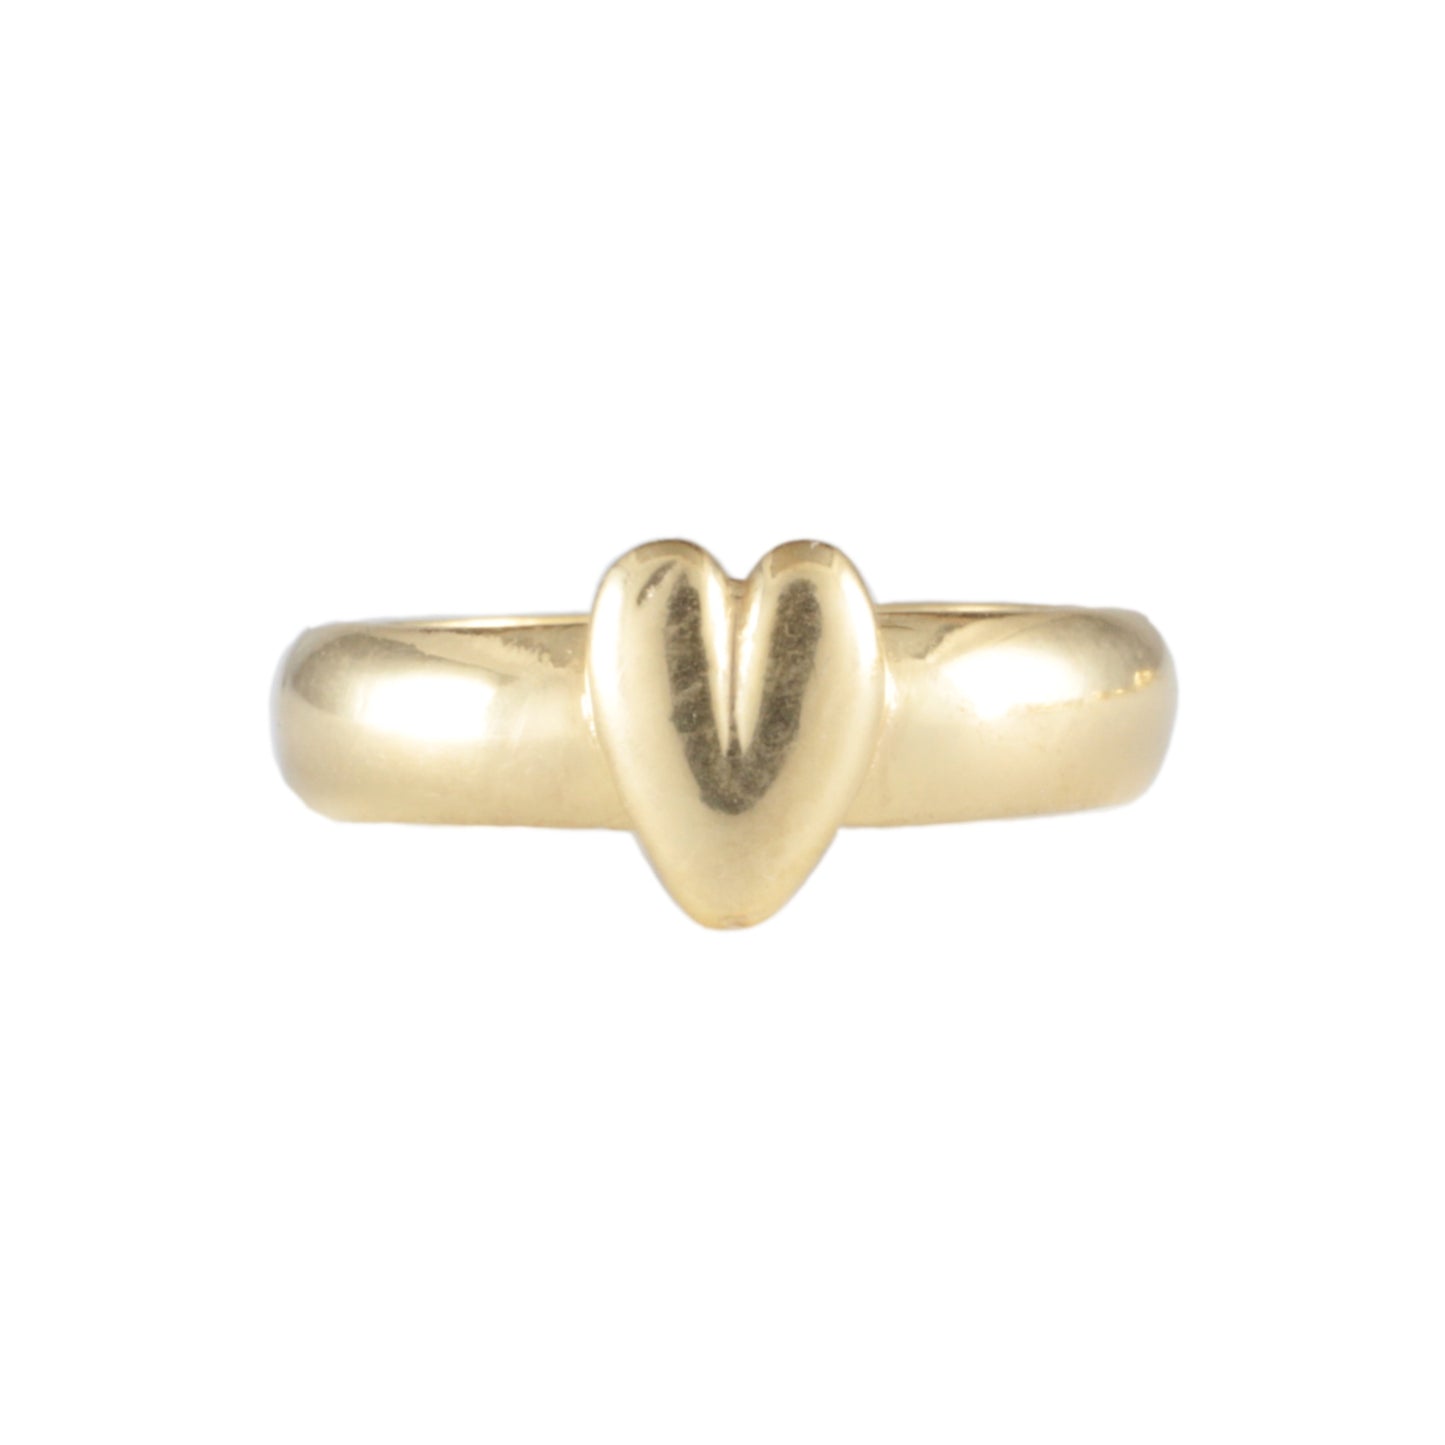 'Cordis' 22ct Medieval style Heart Ring C15th